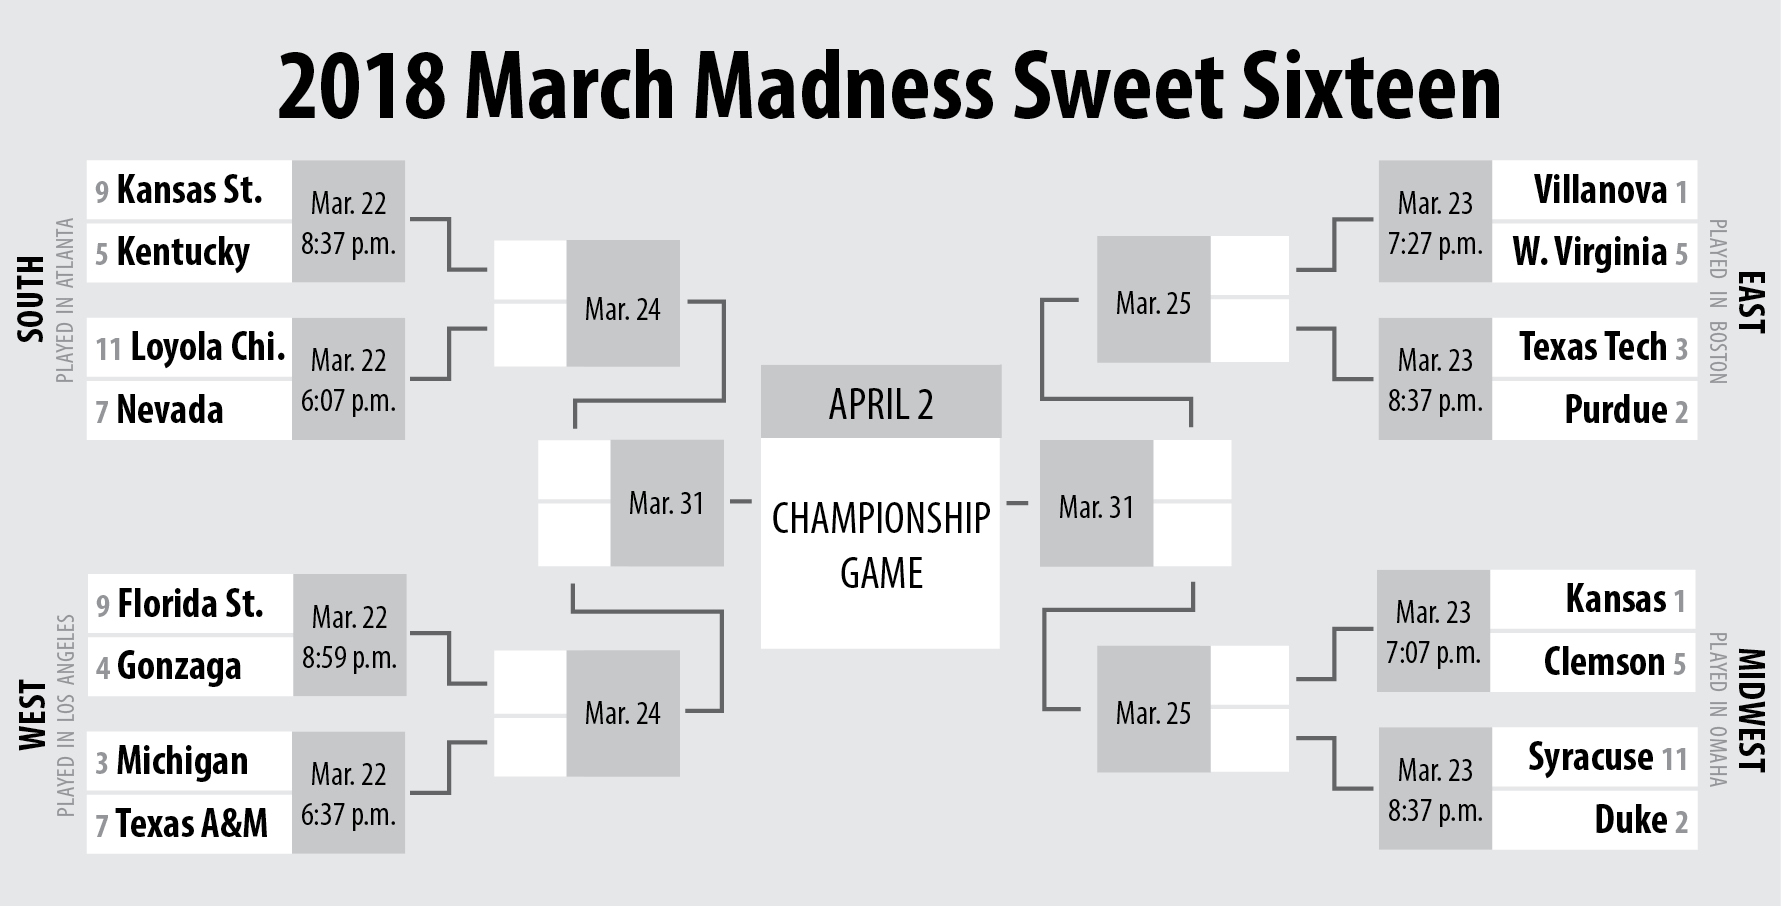 Students unite around college basketball for NCAA March Madness bracket tournaments